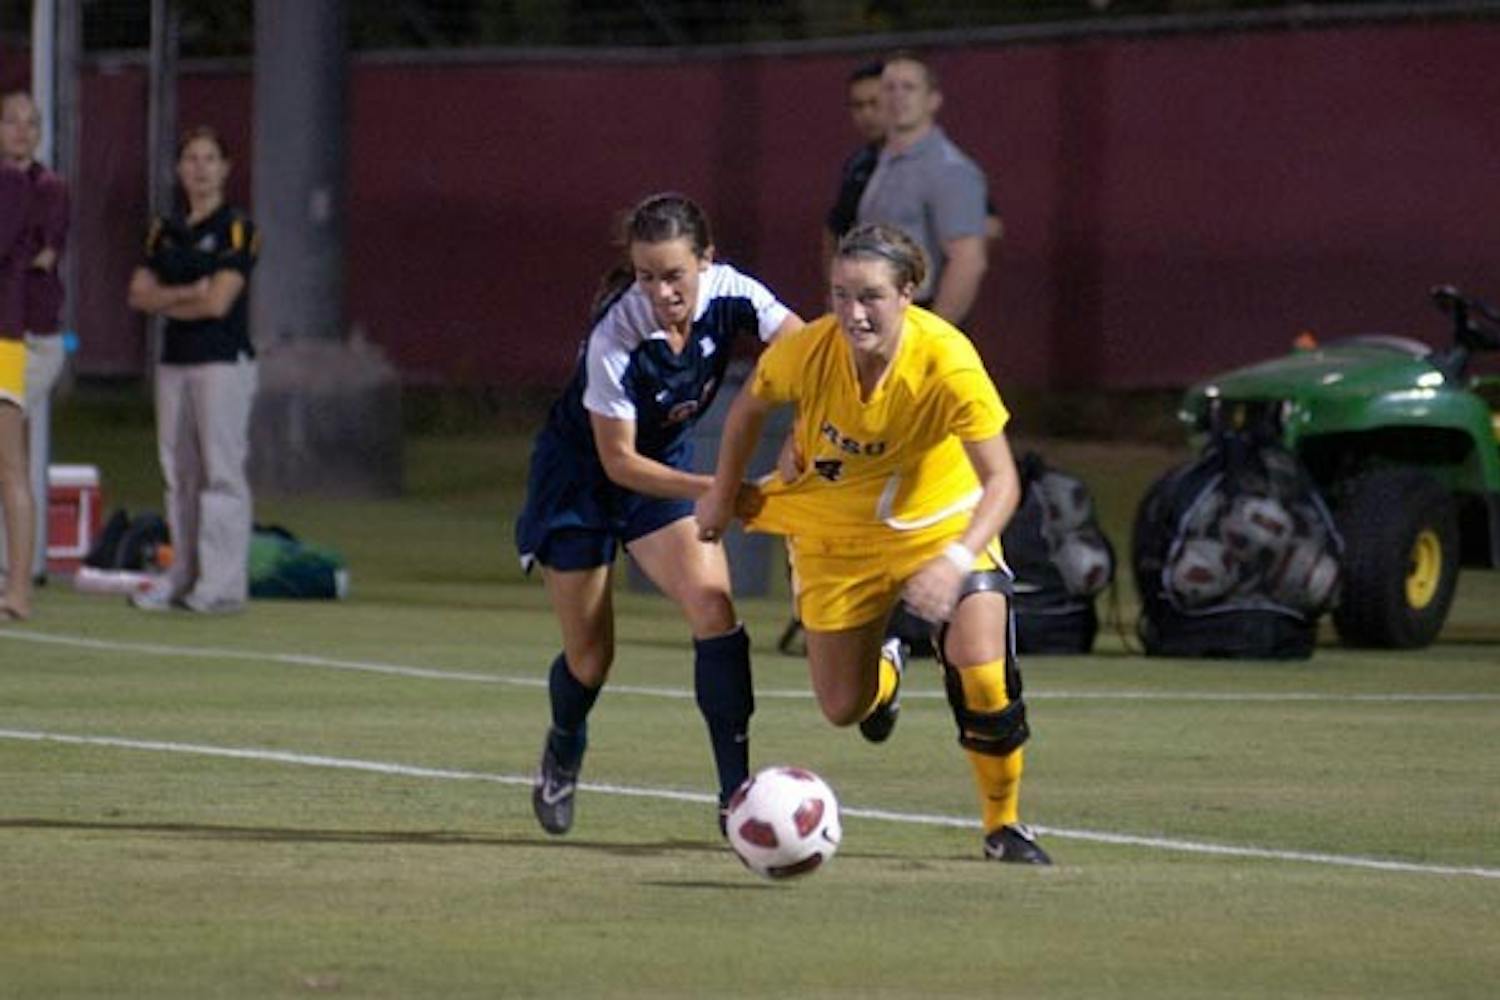 ESCAPE ARTIST: Senior midfielder/forward Jill Shoquist battles out of the grasp of a UA defender during last week’s 2-1 win. The ASU women’s soccer team takes on No. 1 Stanford on Friday and Cal on Sunday. (Photo by Aaron Lavinsky)